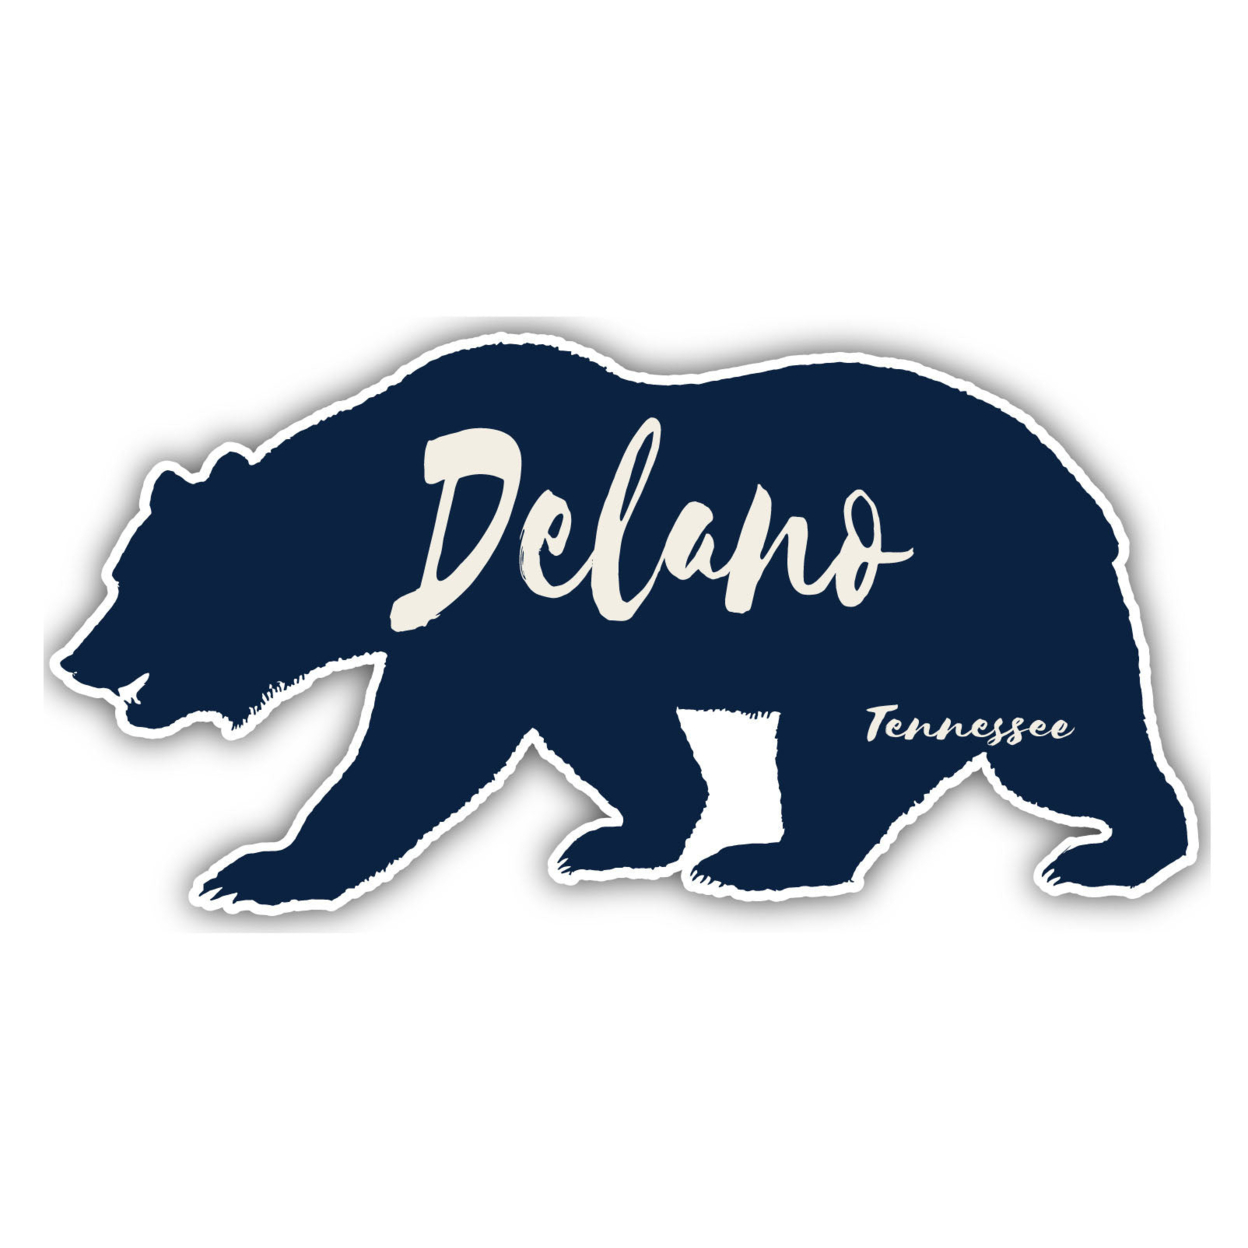 Delano Tennessee Souvenir Decorative Stickers (Choose Theme And Size) - 4-Pack, 8-Inch, Bear